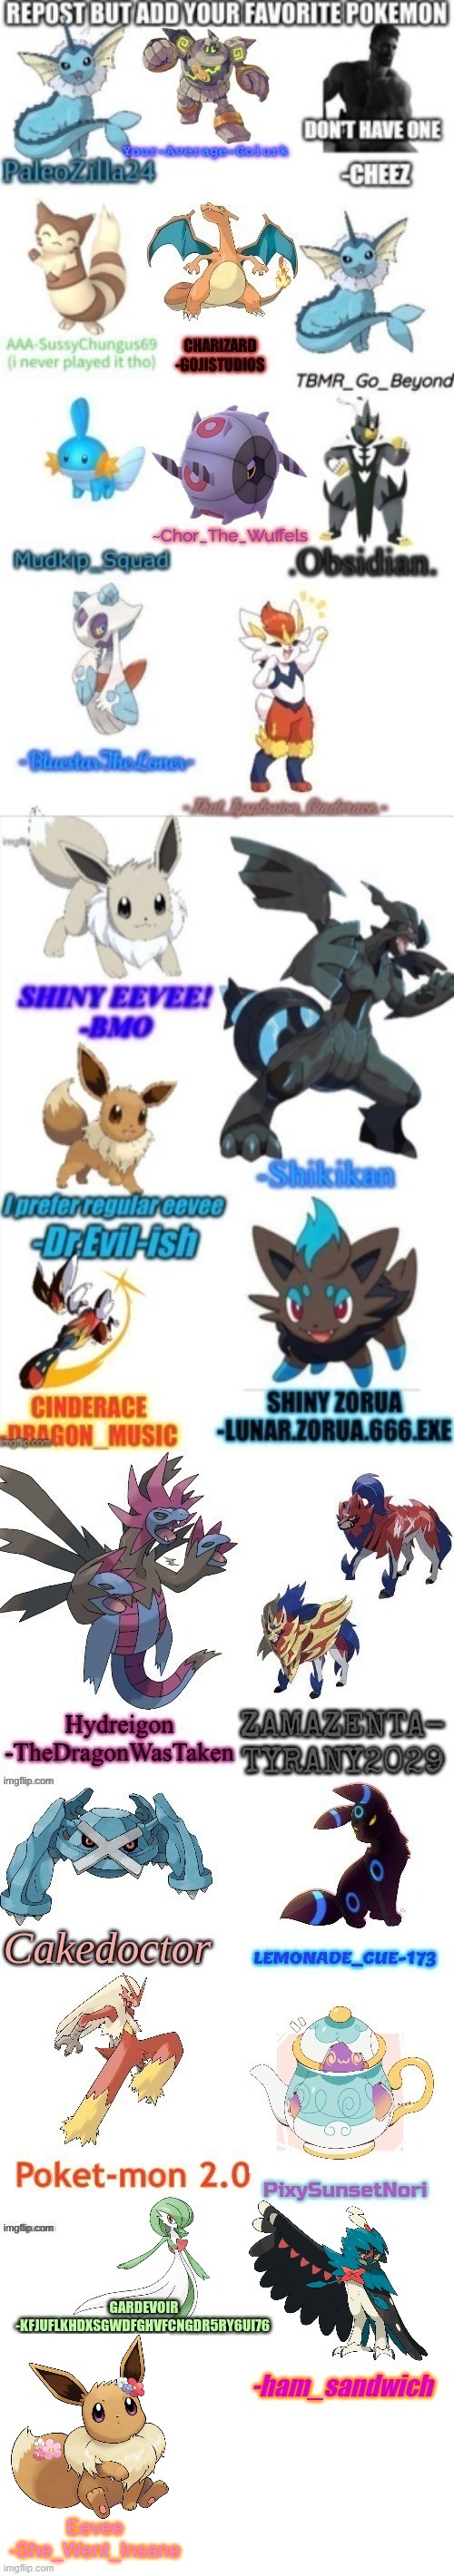 added mine, it's at the bottom | Eevee
-She_Went_Insane | image tagged in repost but add your favorite pokemon,repost | made w/ Imgflip meme maker